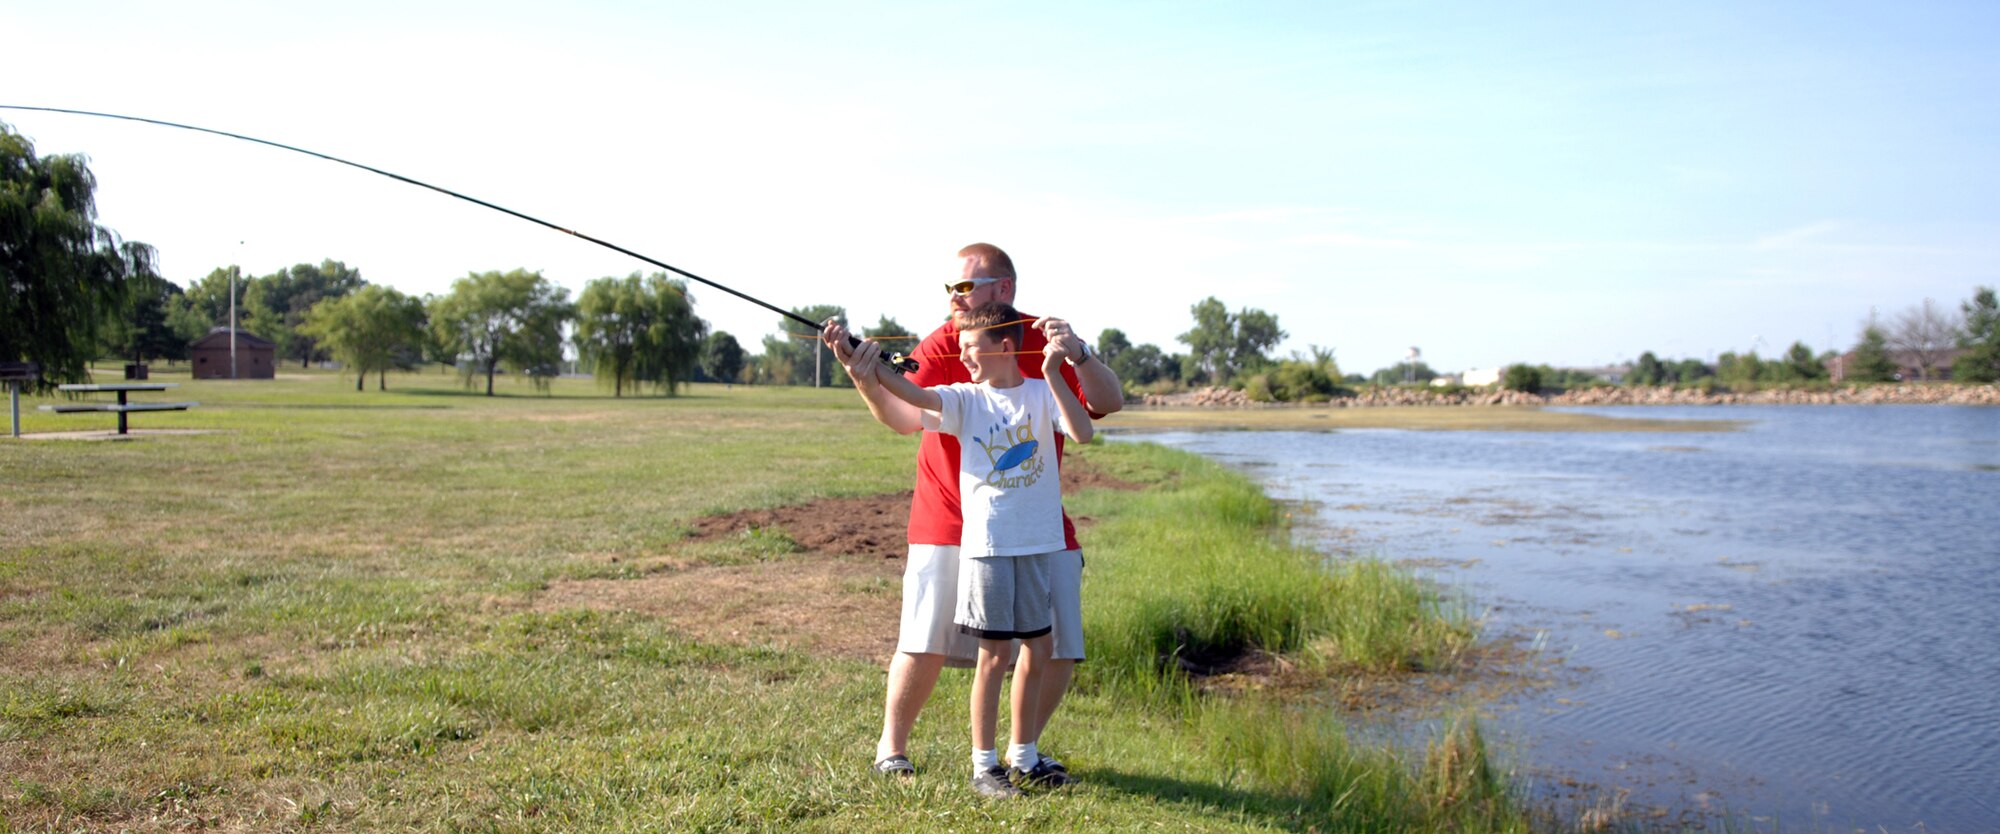 WHITEMAN AIR FORCE BASE, Mo. -- Jerry Davenport helps Matthew Gangemella, son of Master Sgt. Gregg Gangemella, 509th Aircraft Maintenance Squadron, and Sharon Gangemella, 509th SVS, casts a fly line into Ike Skelton Lake during a youth fishing class July 24. For other events check www.whitemanservices.com (U.S. Air Force photo/Airman 1st Class Stephen Linch)
. 
